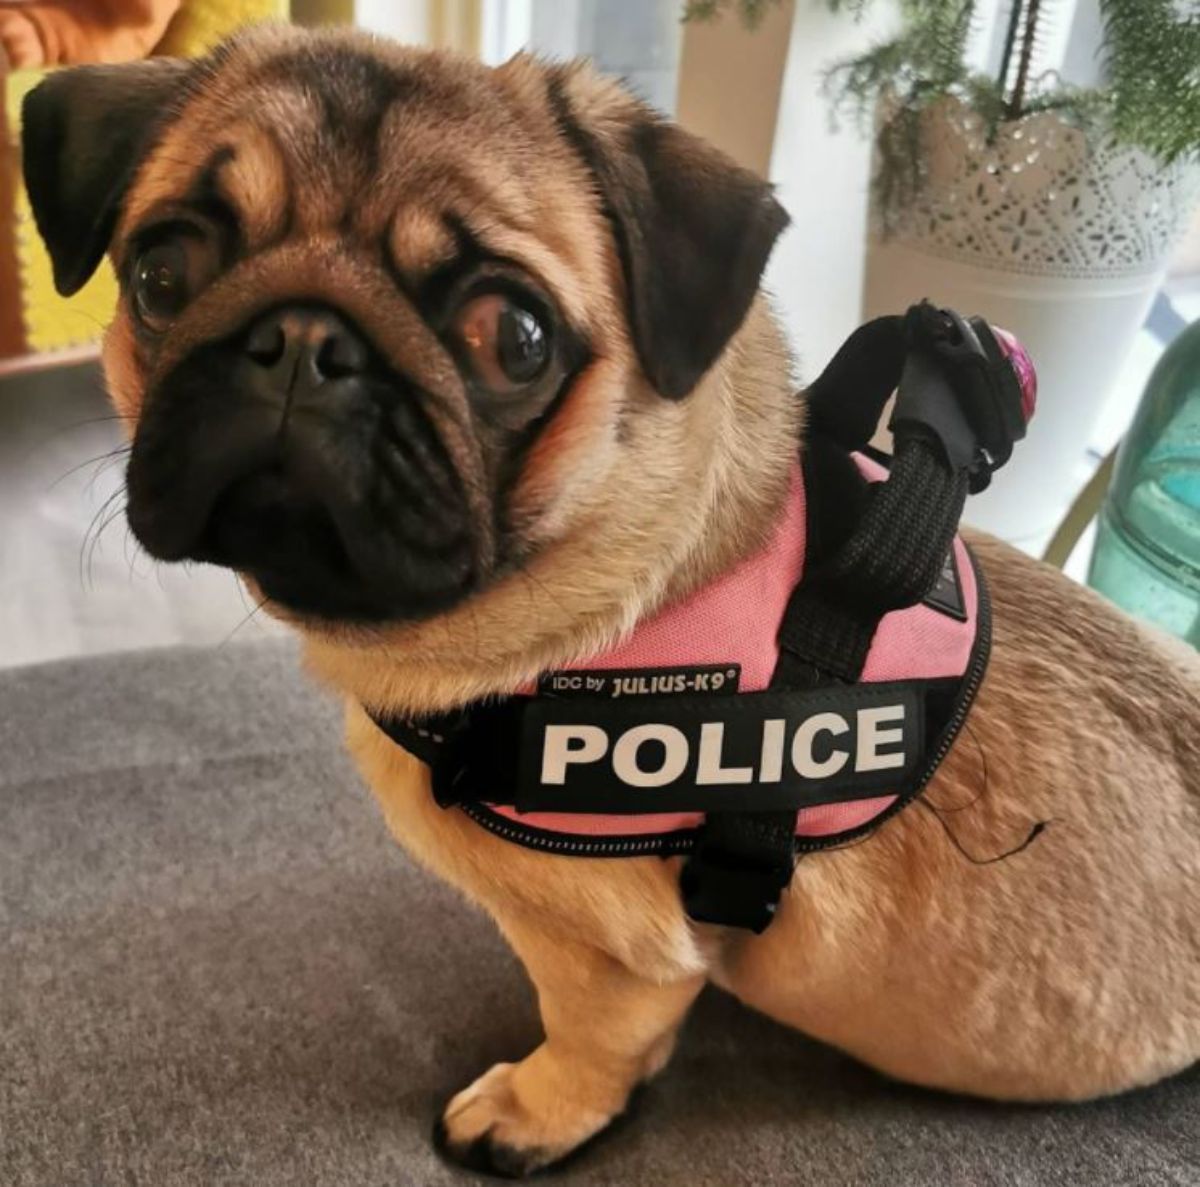 Pug sitting on the couch wearing a pink police harness